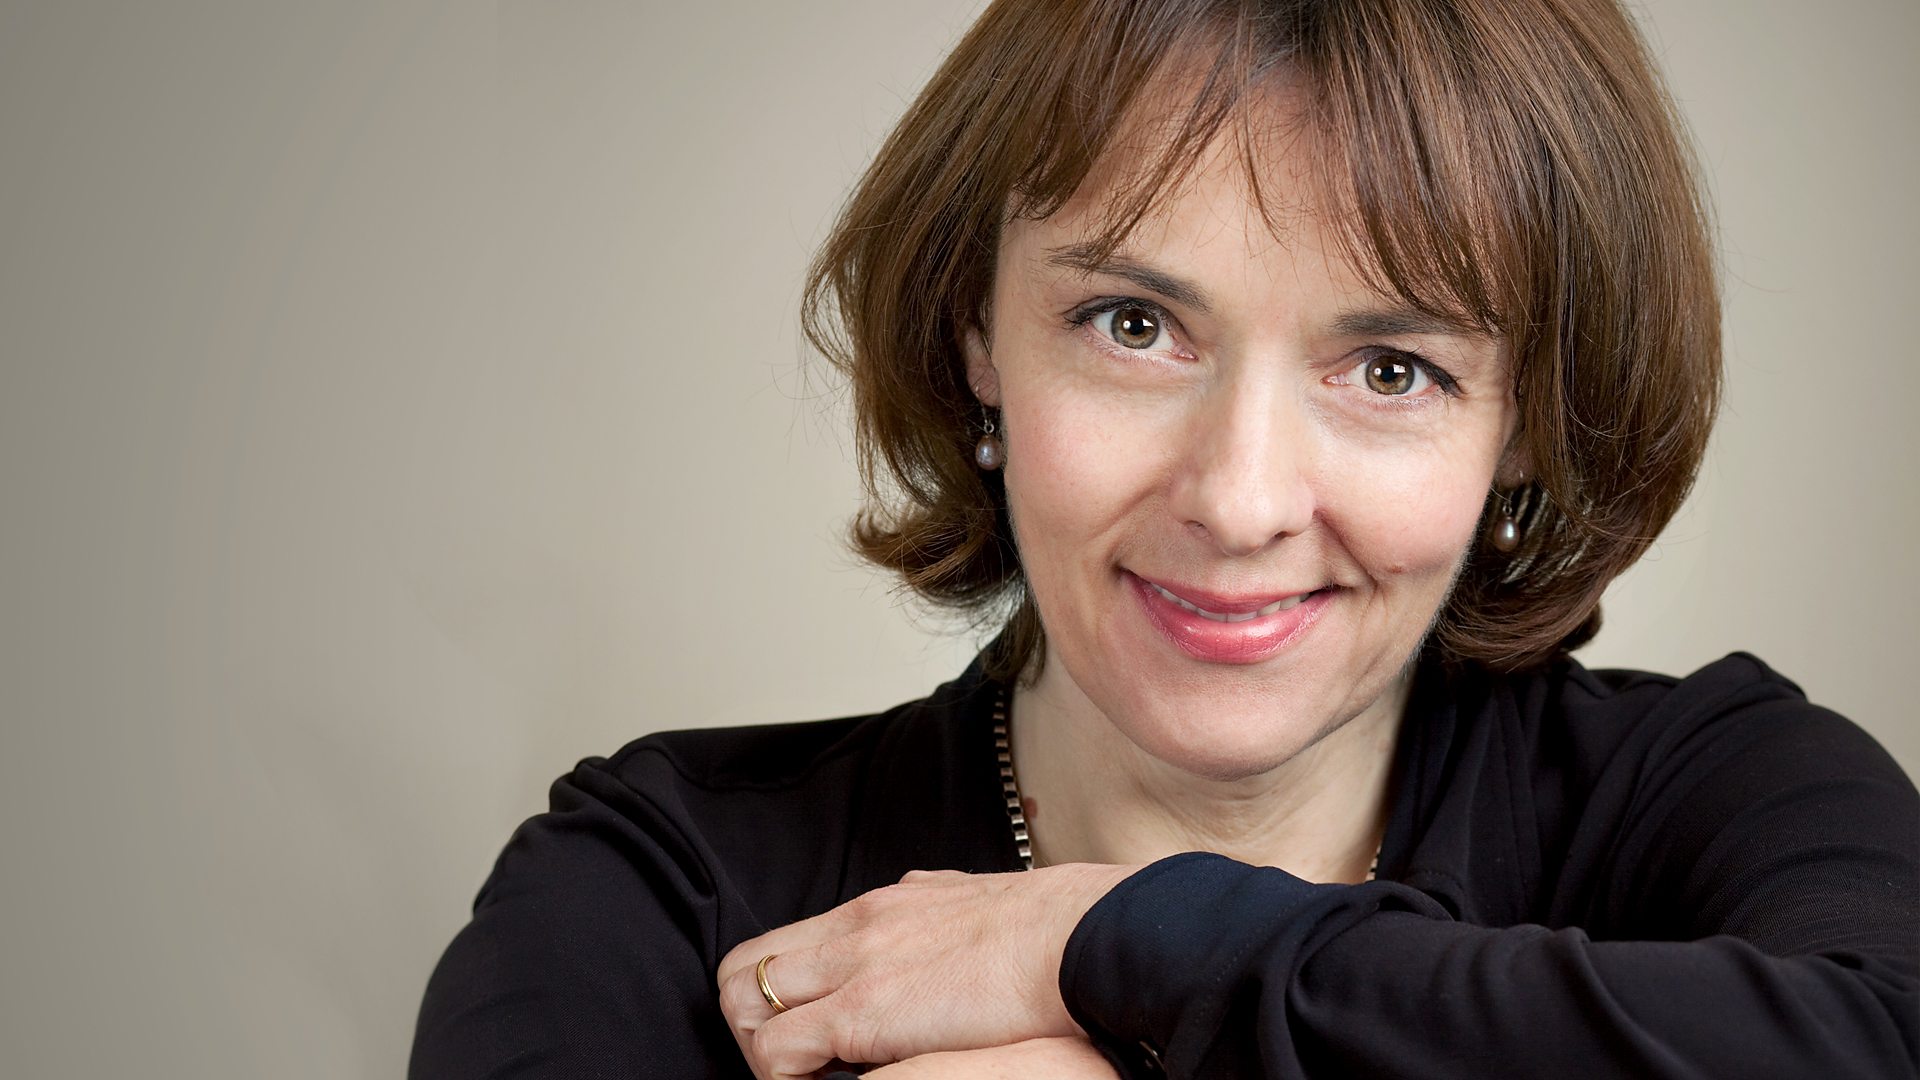 Lucy Kellaway is an Examplar Bicycle Commuter